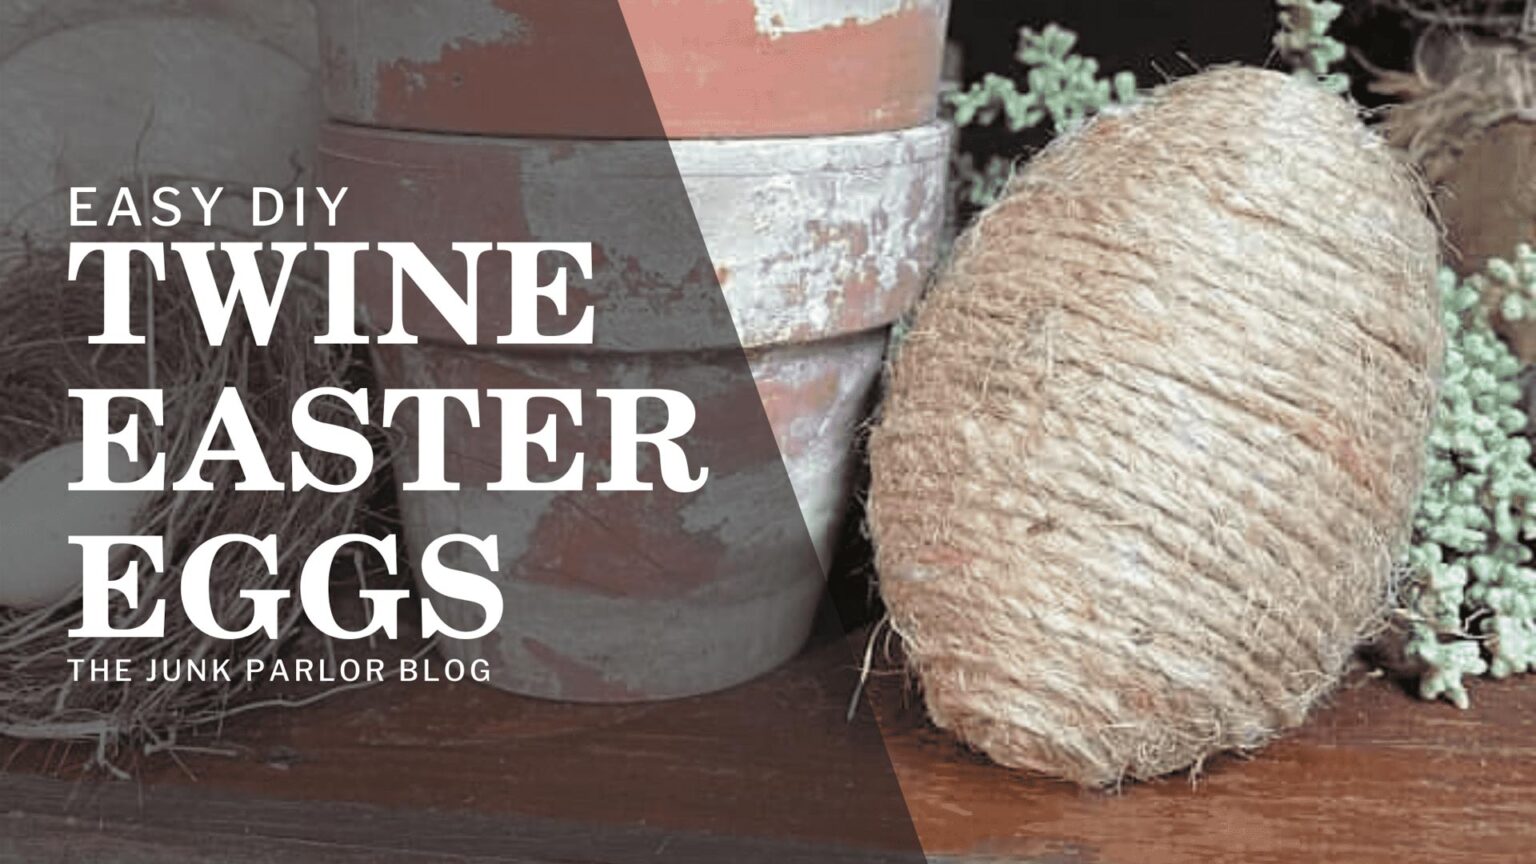 Easy DIY Twine Easter Eggs by The Junk Parlor Blog Header